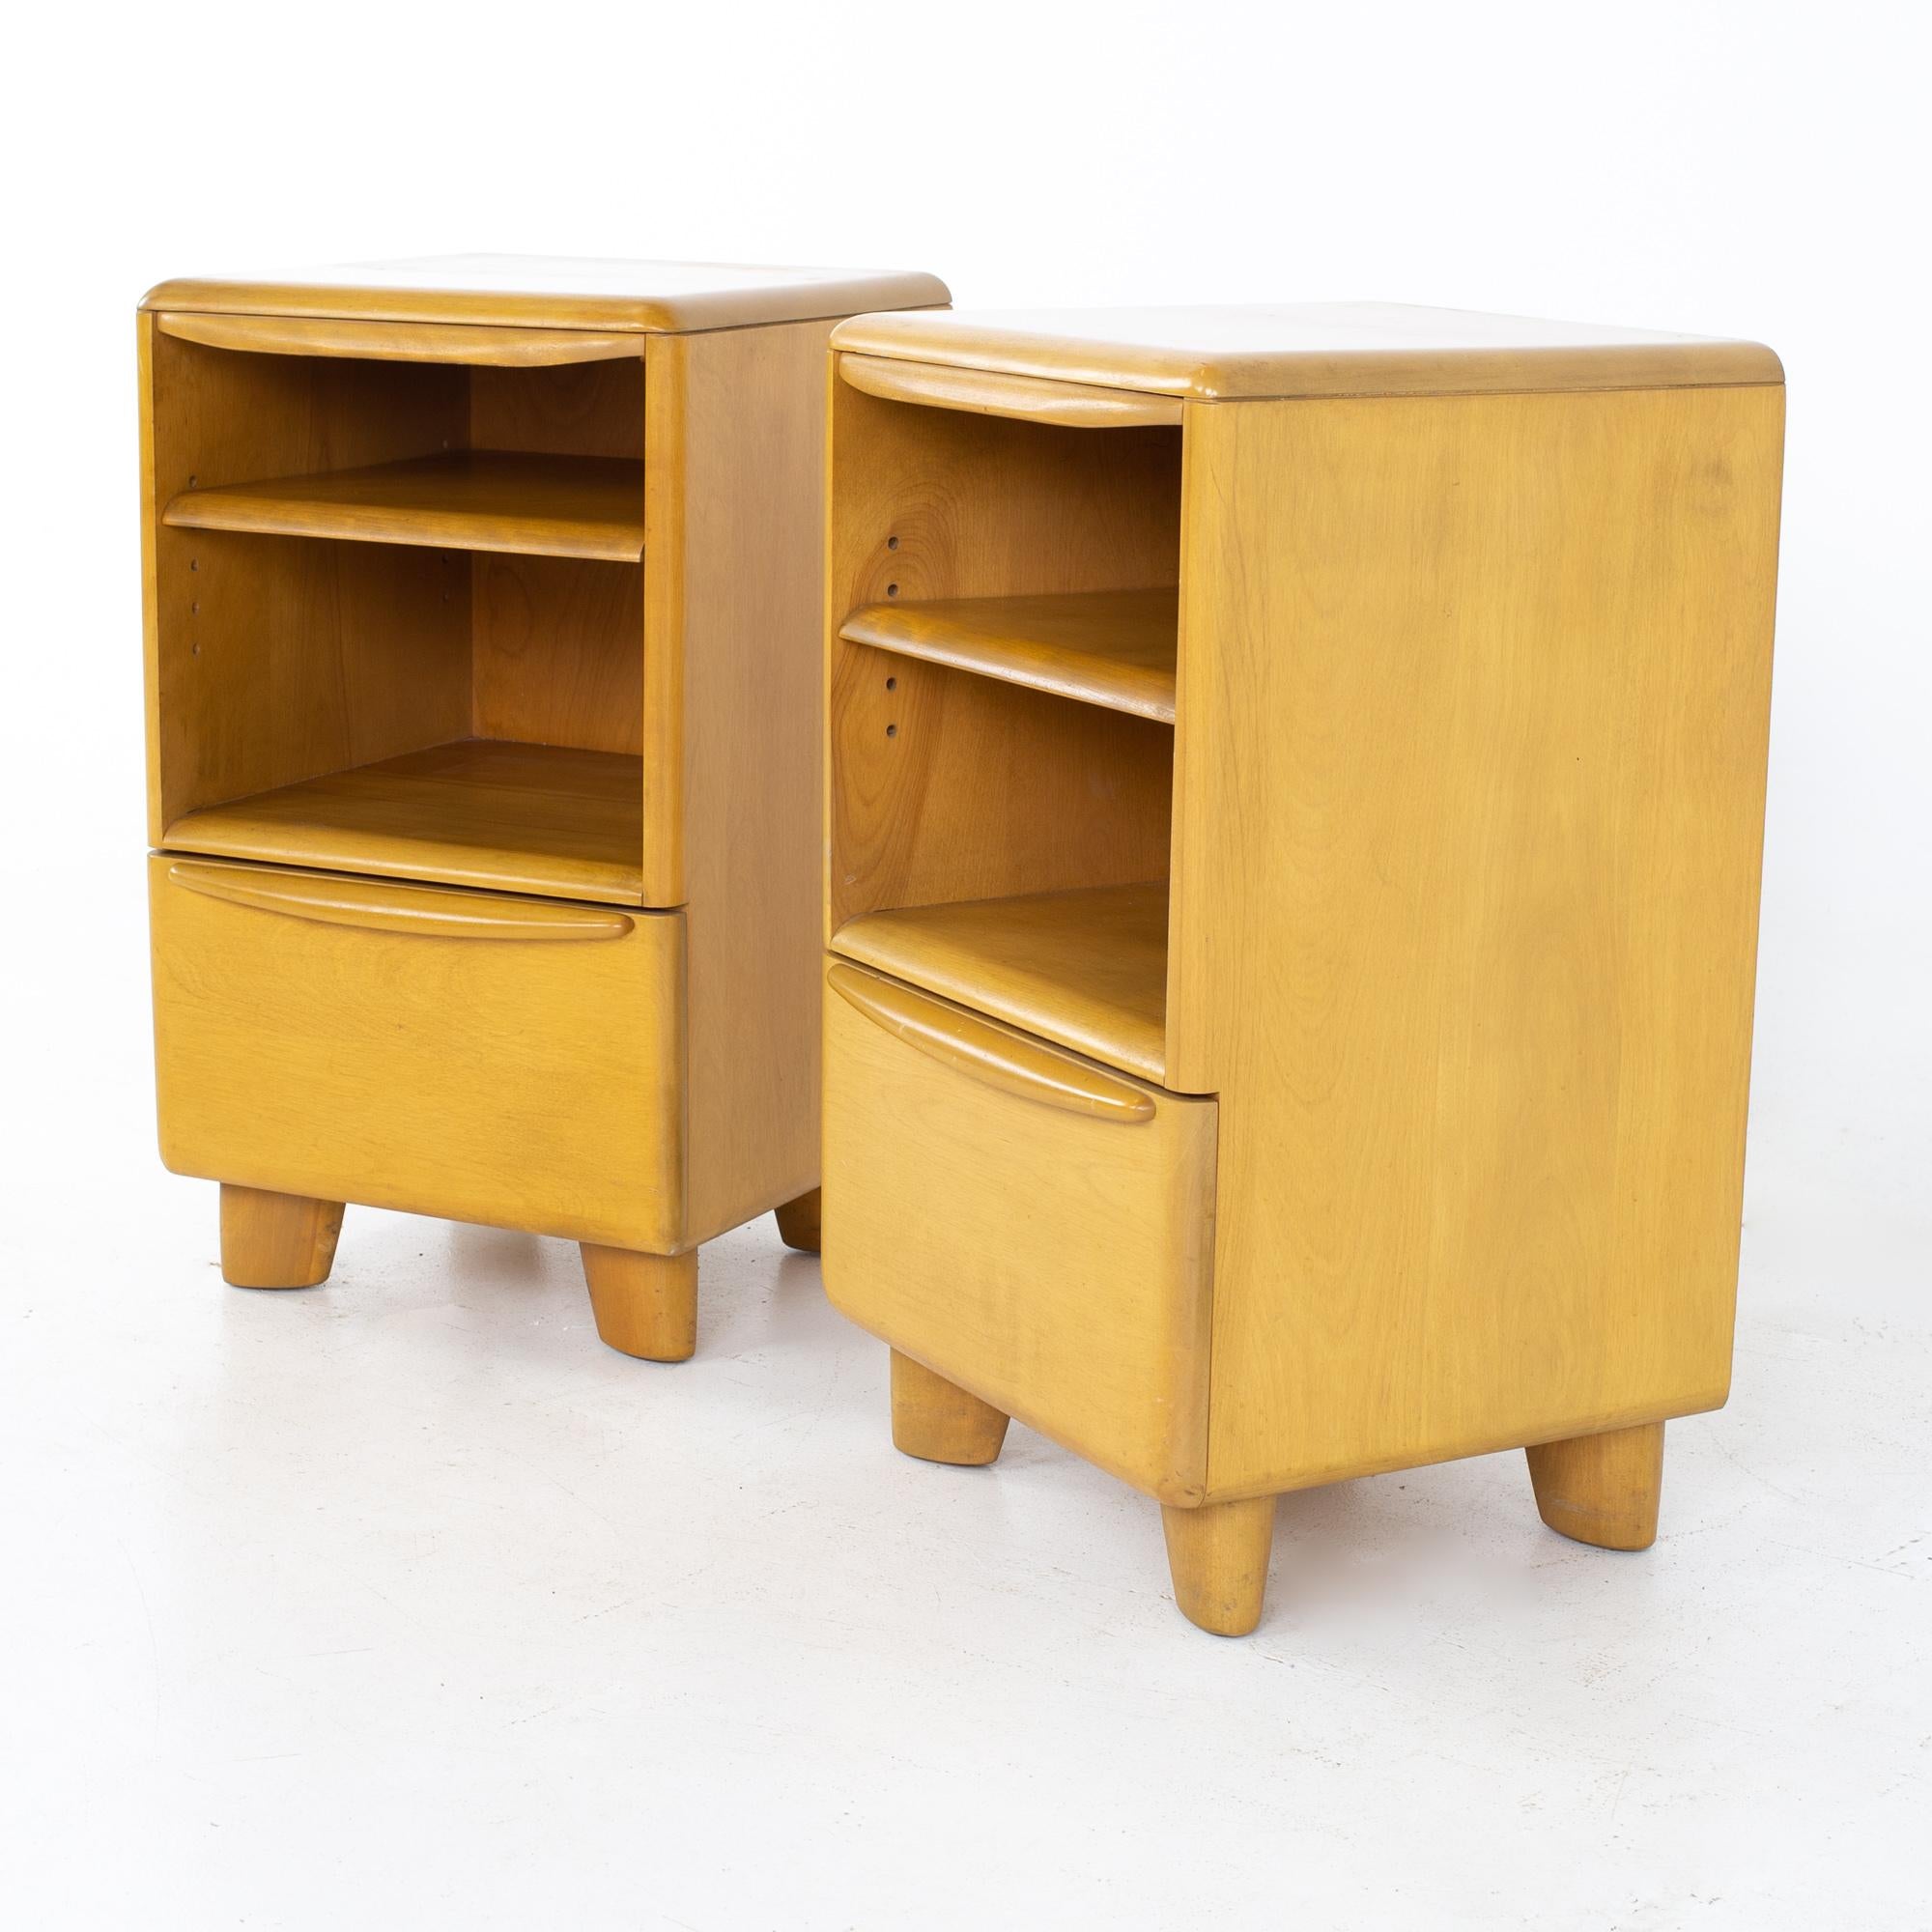 Heywood Wakefield Encore mid century blonde wheat nightstands - A pair
Each nightstand measures: 14.75 wide x 15 deep x 25 inches high

All pieces of furniture can be had in what we call restored vintage condition. That means the piece is